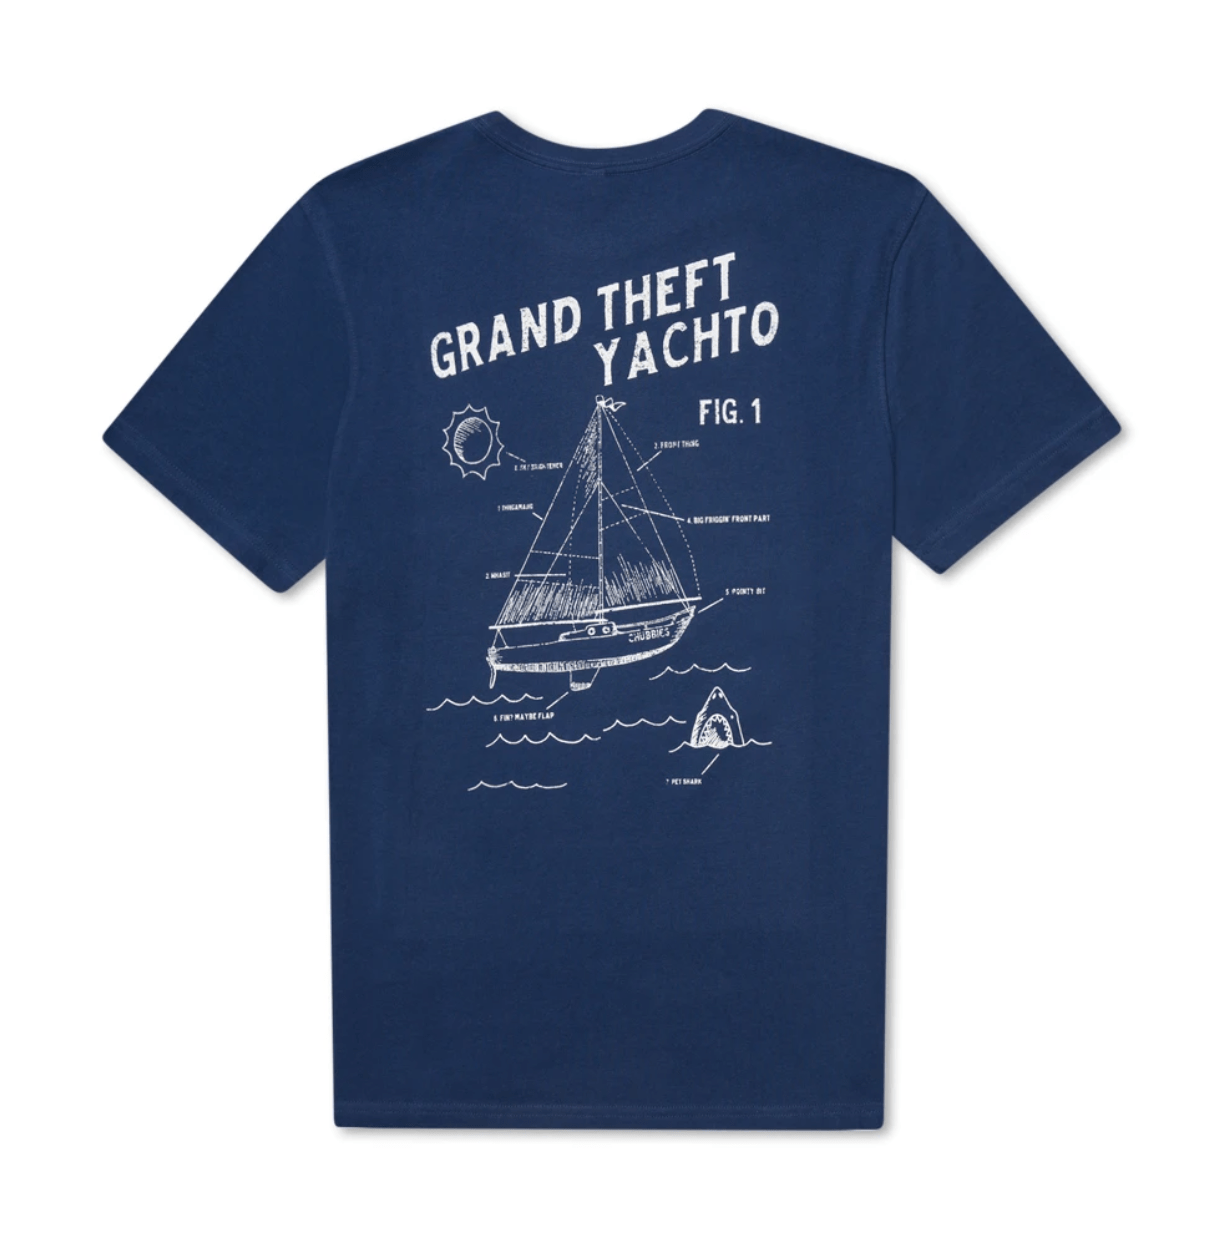  Navy Chubbies, Men's Mr. Steal Your Boat Tee Shirt (Navy Blue)